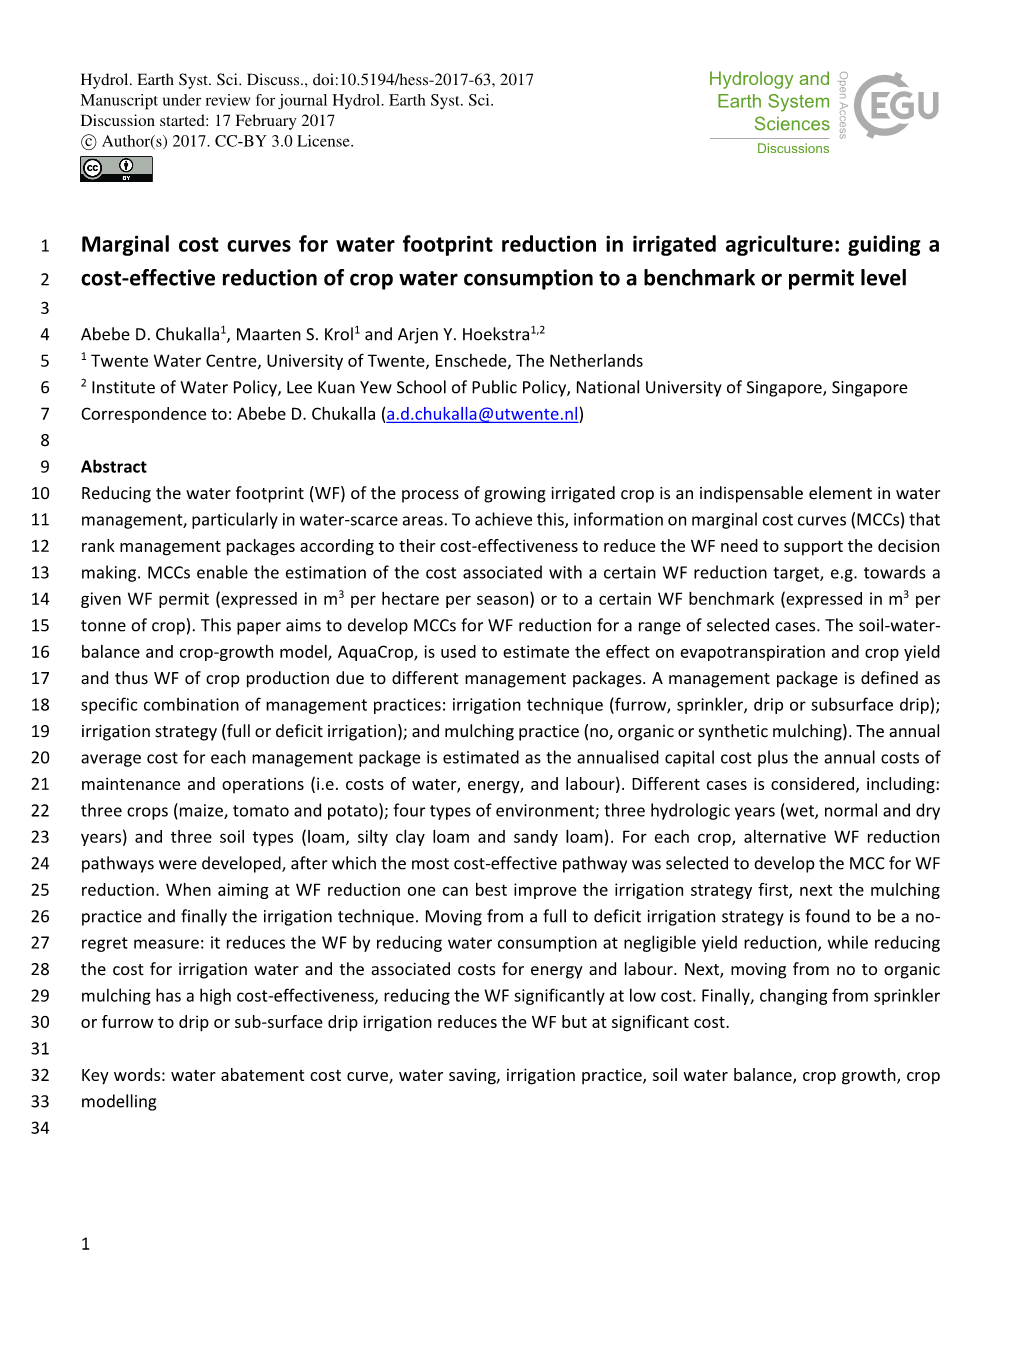 Marginal Cost Curves for Water Footprint Reduction in Irrigated